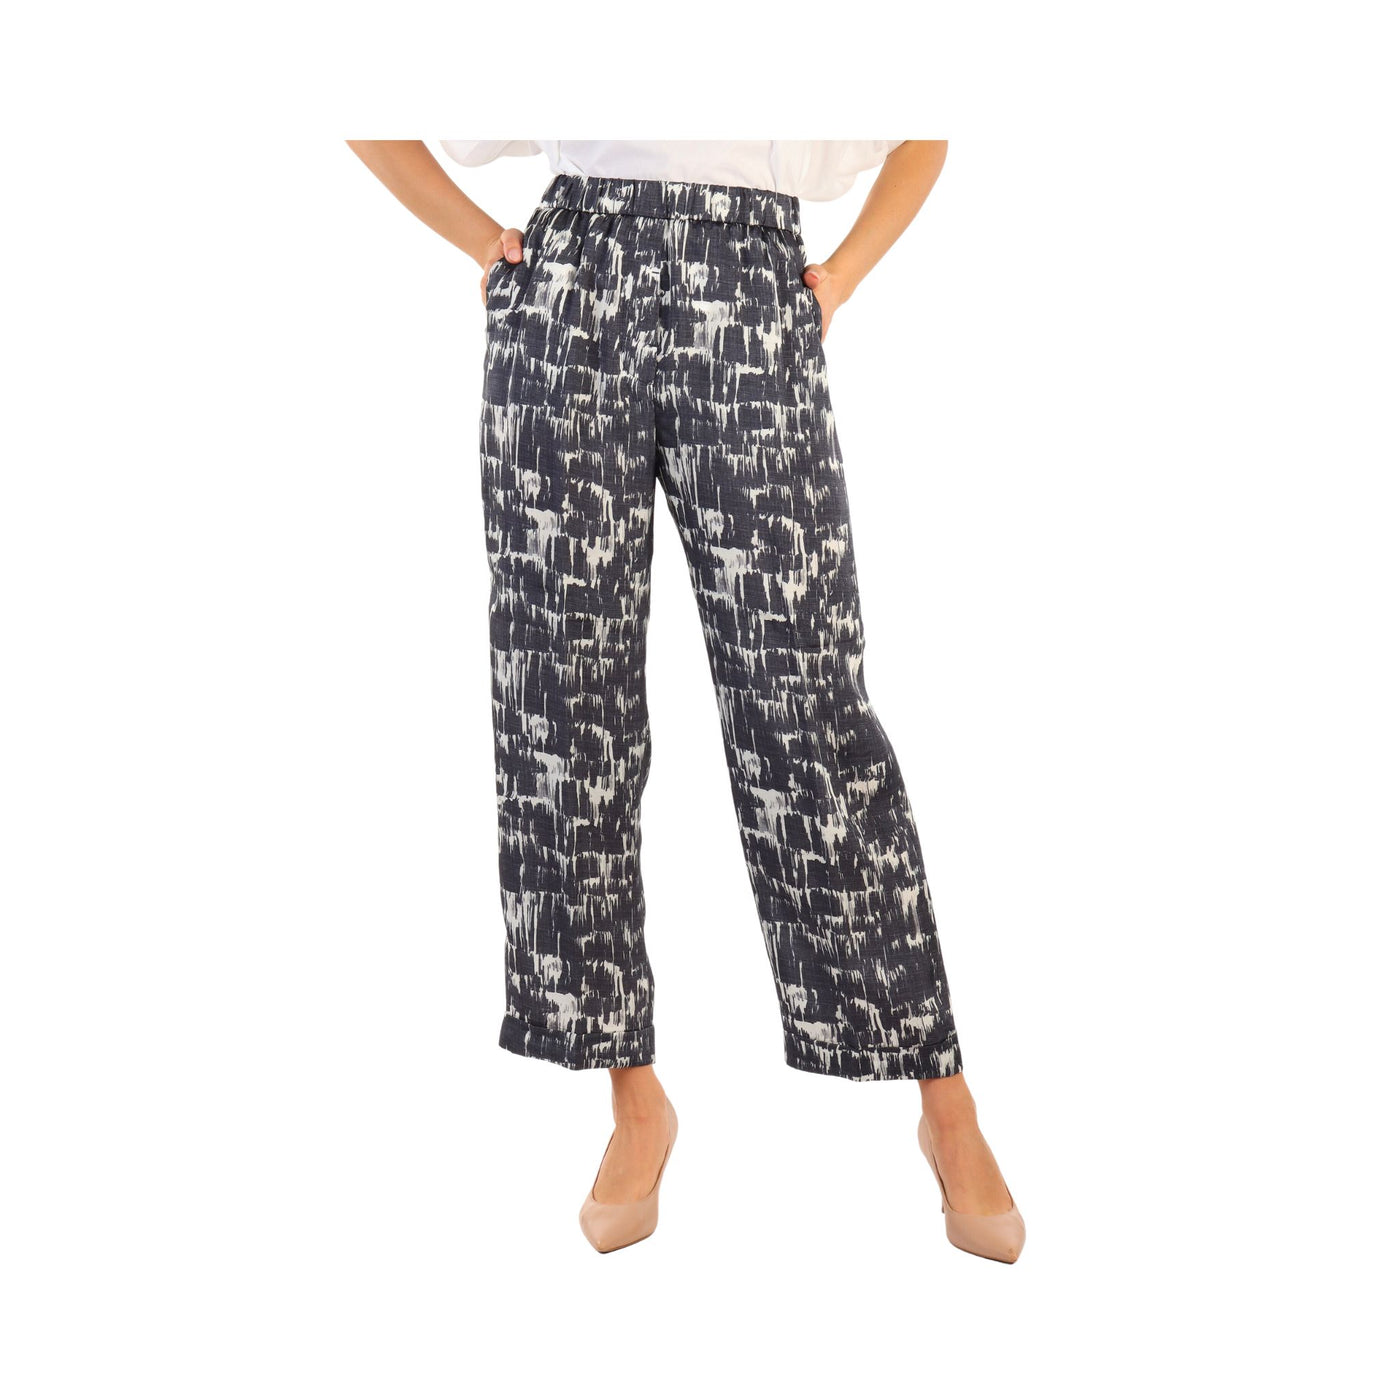 Women's trousers with colored pattern